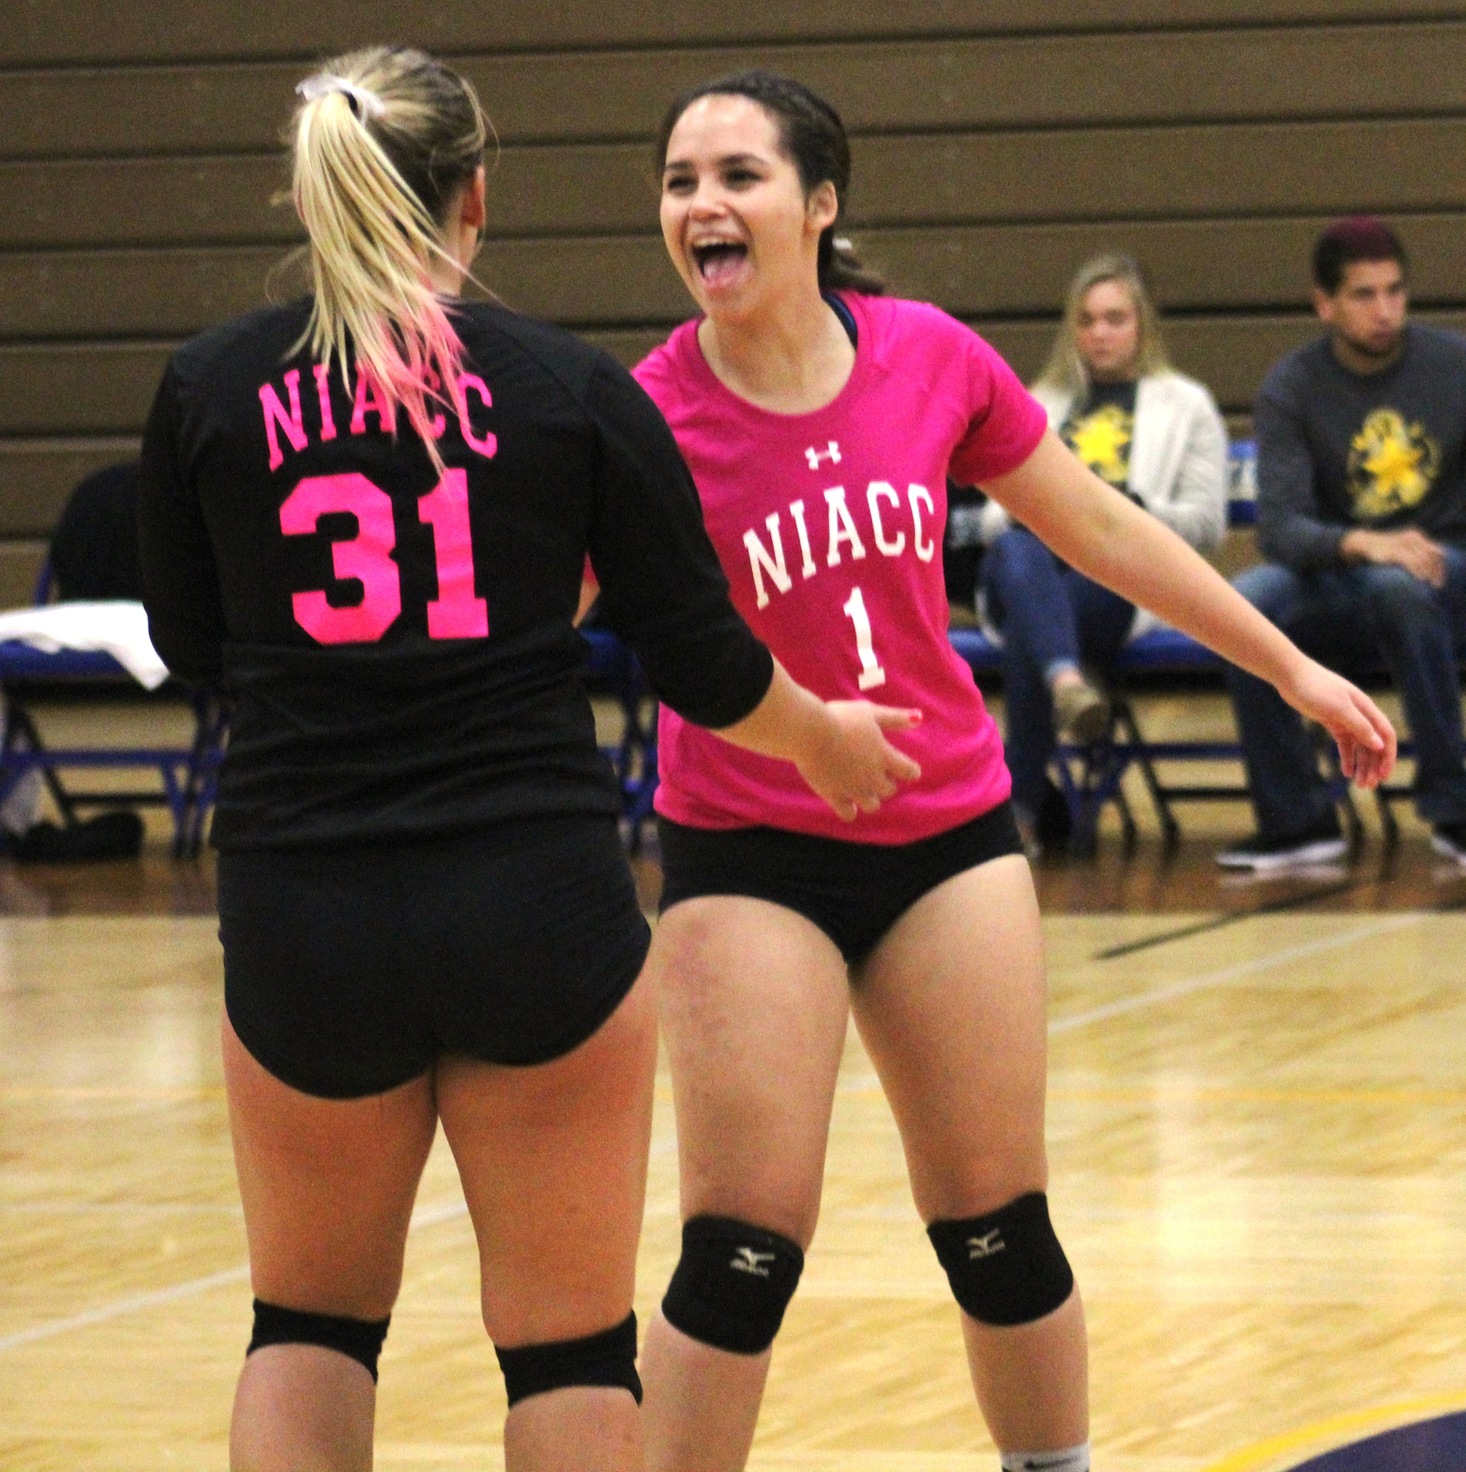 NIACC's Kyra Marquez (right) and Sammi Hyde celebrate a point in Wednesday's match.